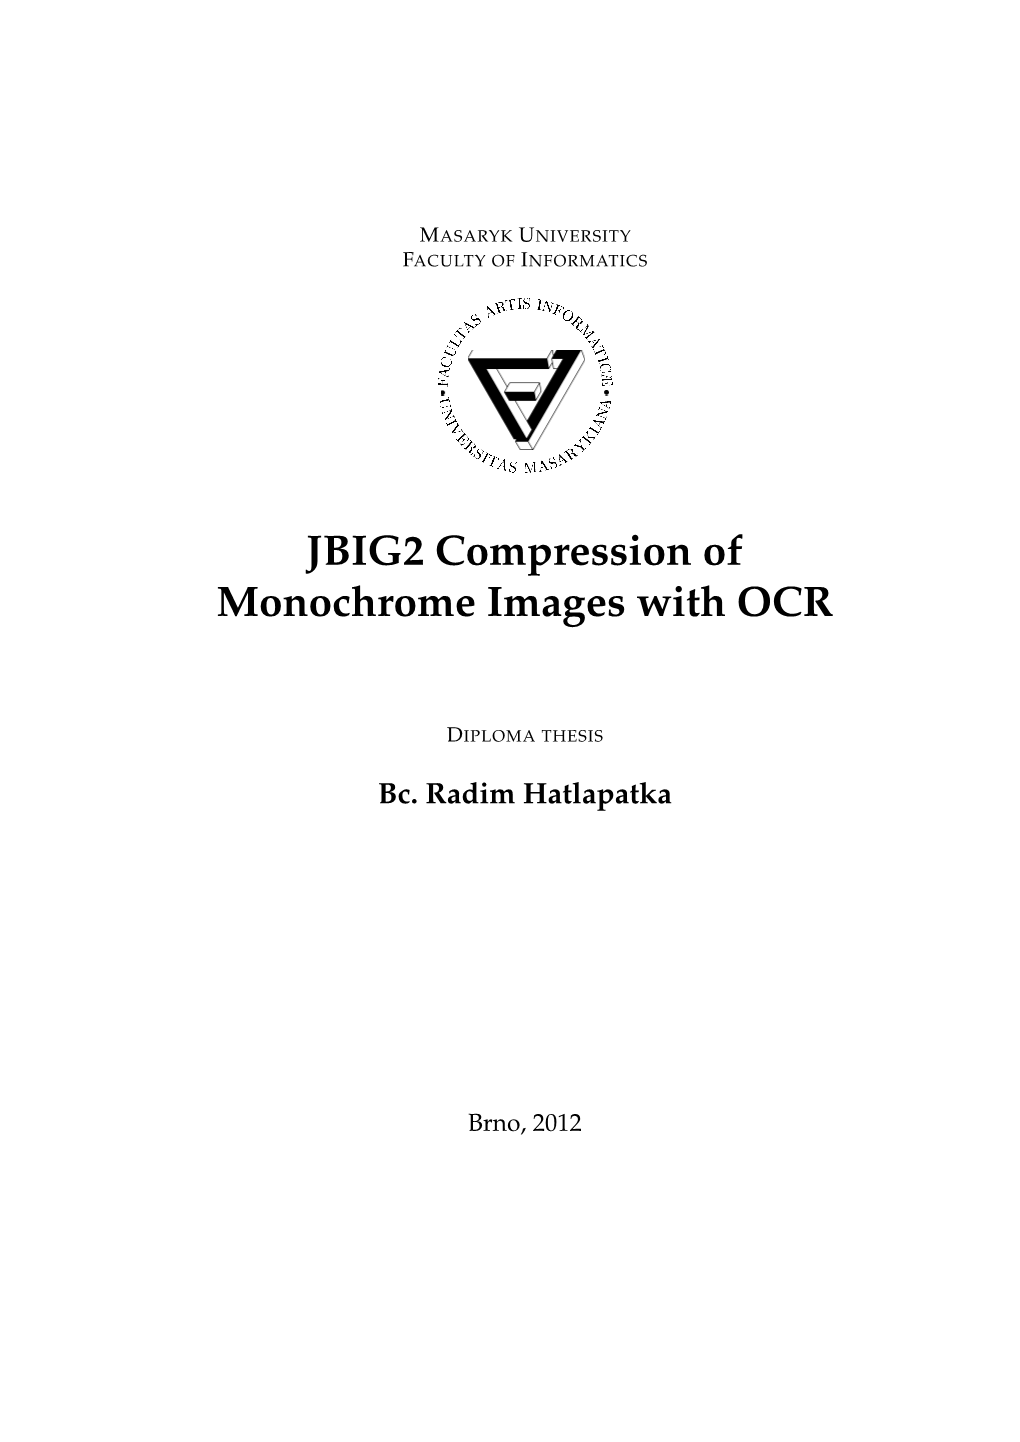 JBIG2 Compression of Monochrome Images with OCR